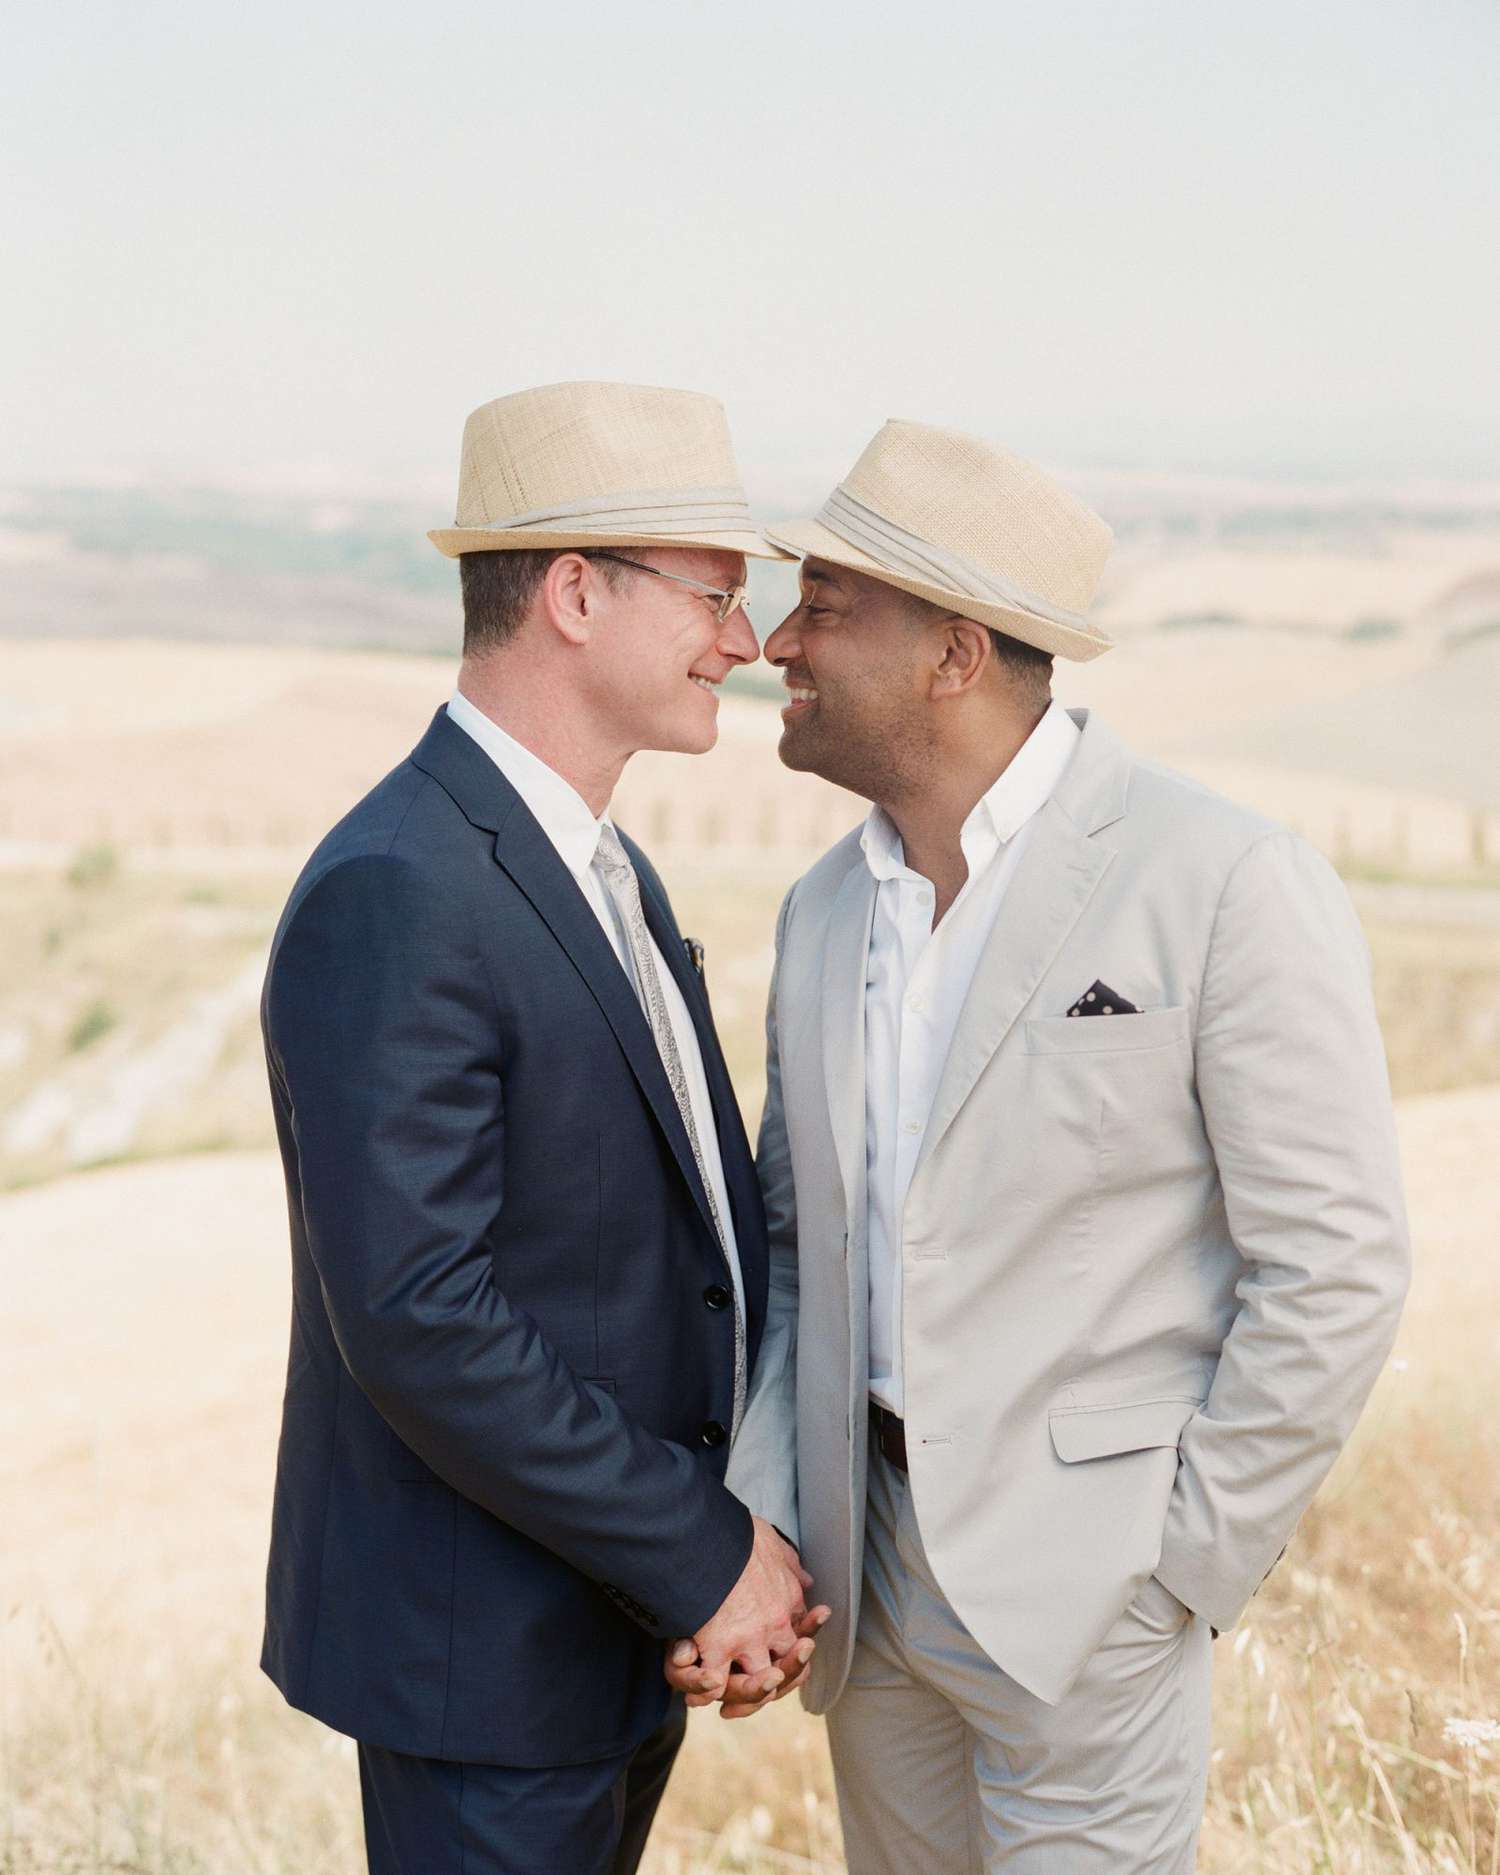 <p>At 8 a.m. on the big day, the couple, their photographer, and a driver with an old Fiat (adorned with a "Just Married" sign in Italian) went from one picturesque Tuscan spot to another, taking prewedding photos. "We felt like models on a photo shoot&mdash;it was so much fun!" says Dennis.</p>
                            <p>At noon, they stopped in a neighboring town, Rapolano Terme, for lunch at a quaint osteria. And then headed back to the hotel to get ready for the wedding.</p>
                            